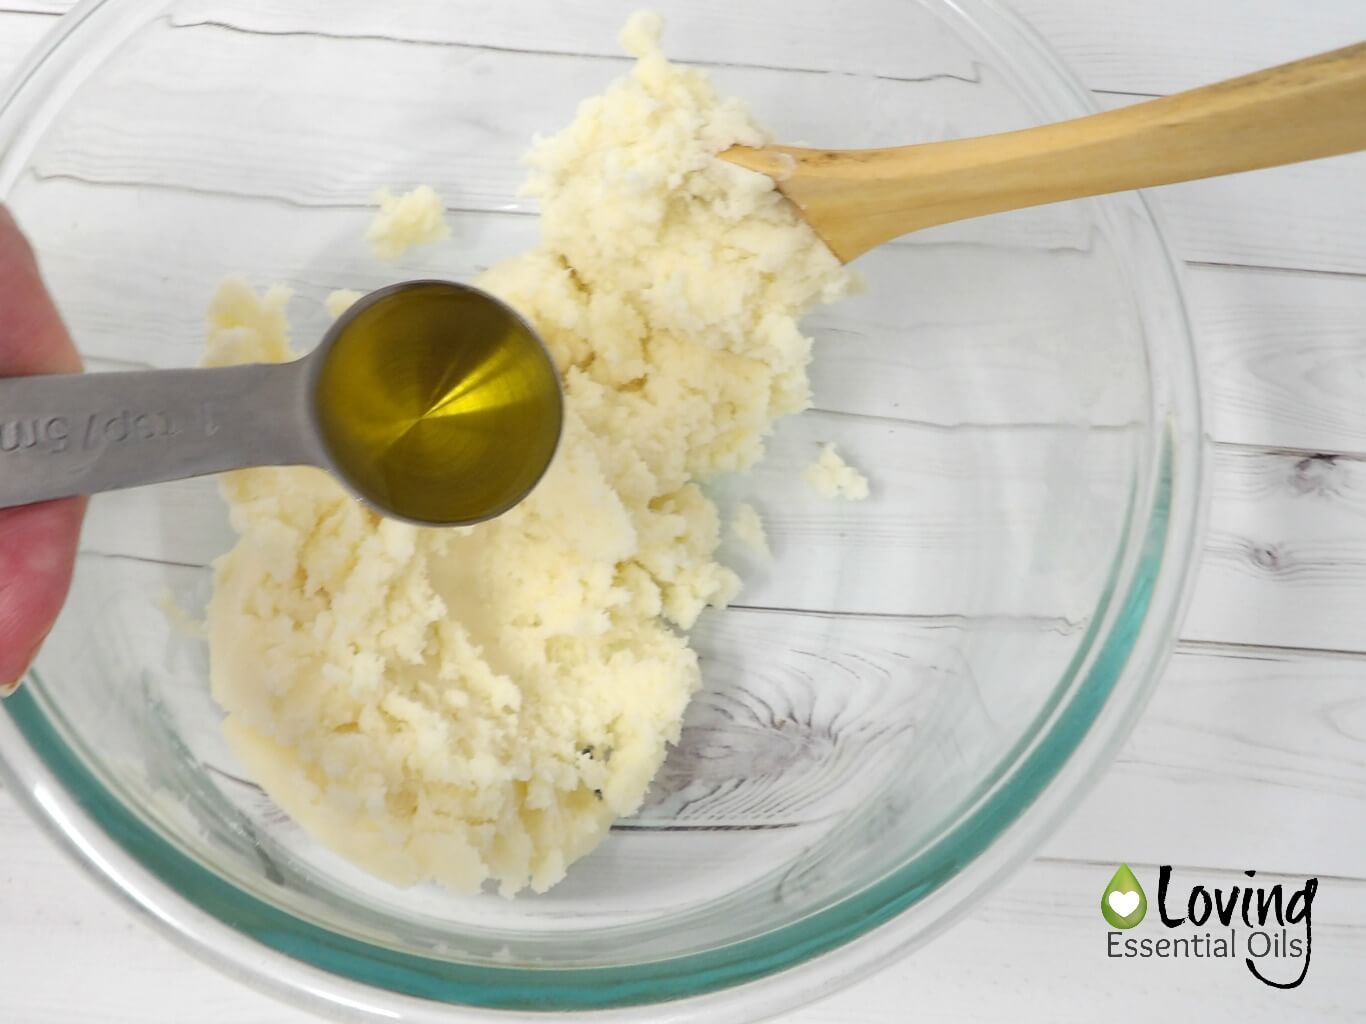 Whipped Shea Butter Recipe by Loving Essential Oils